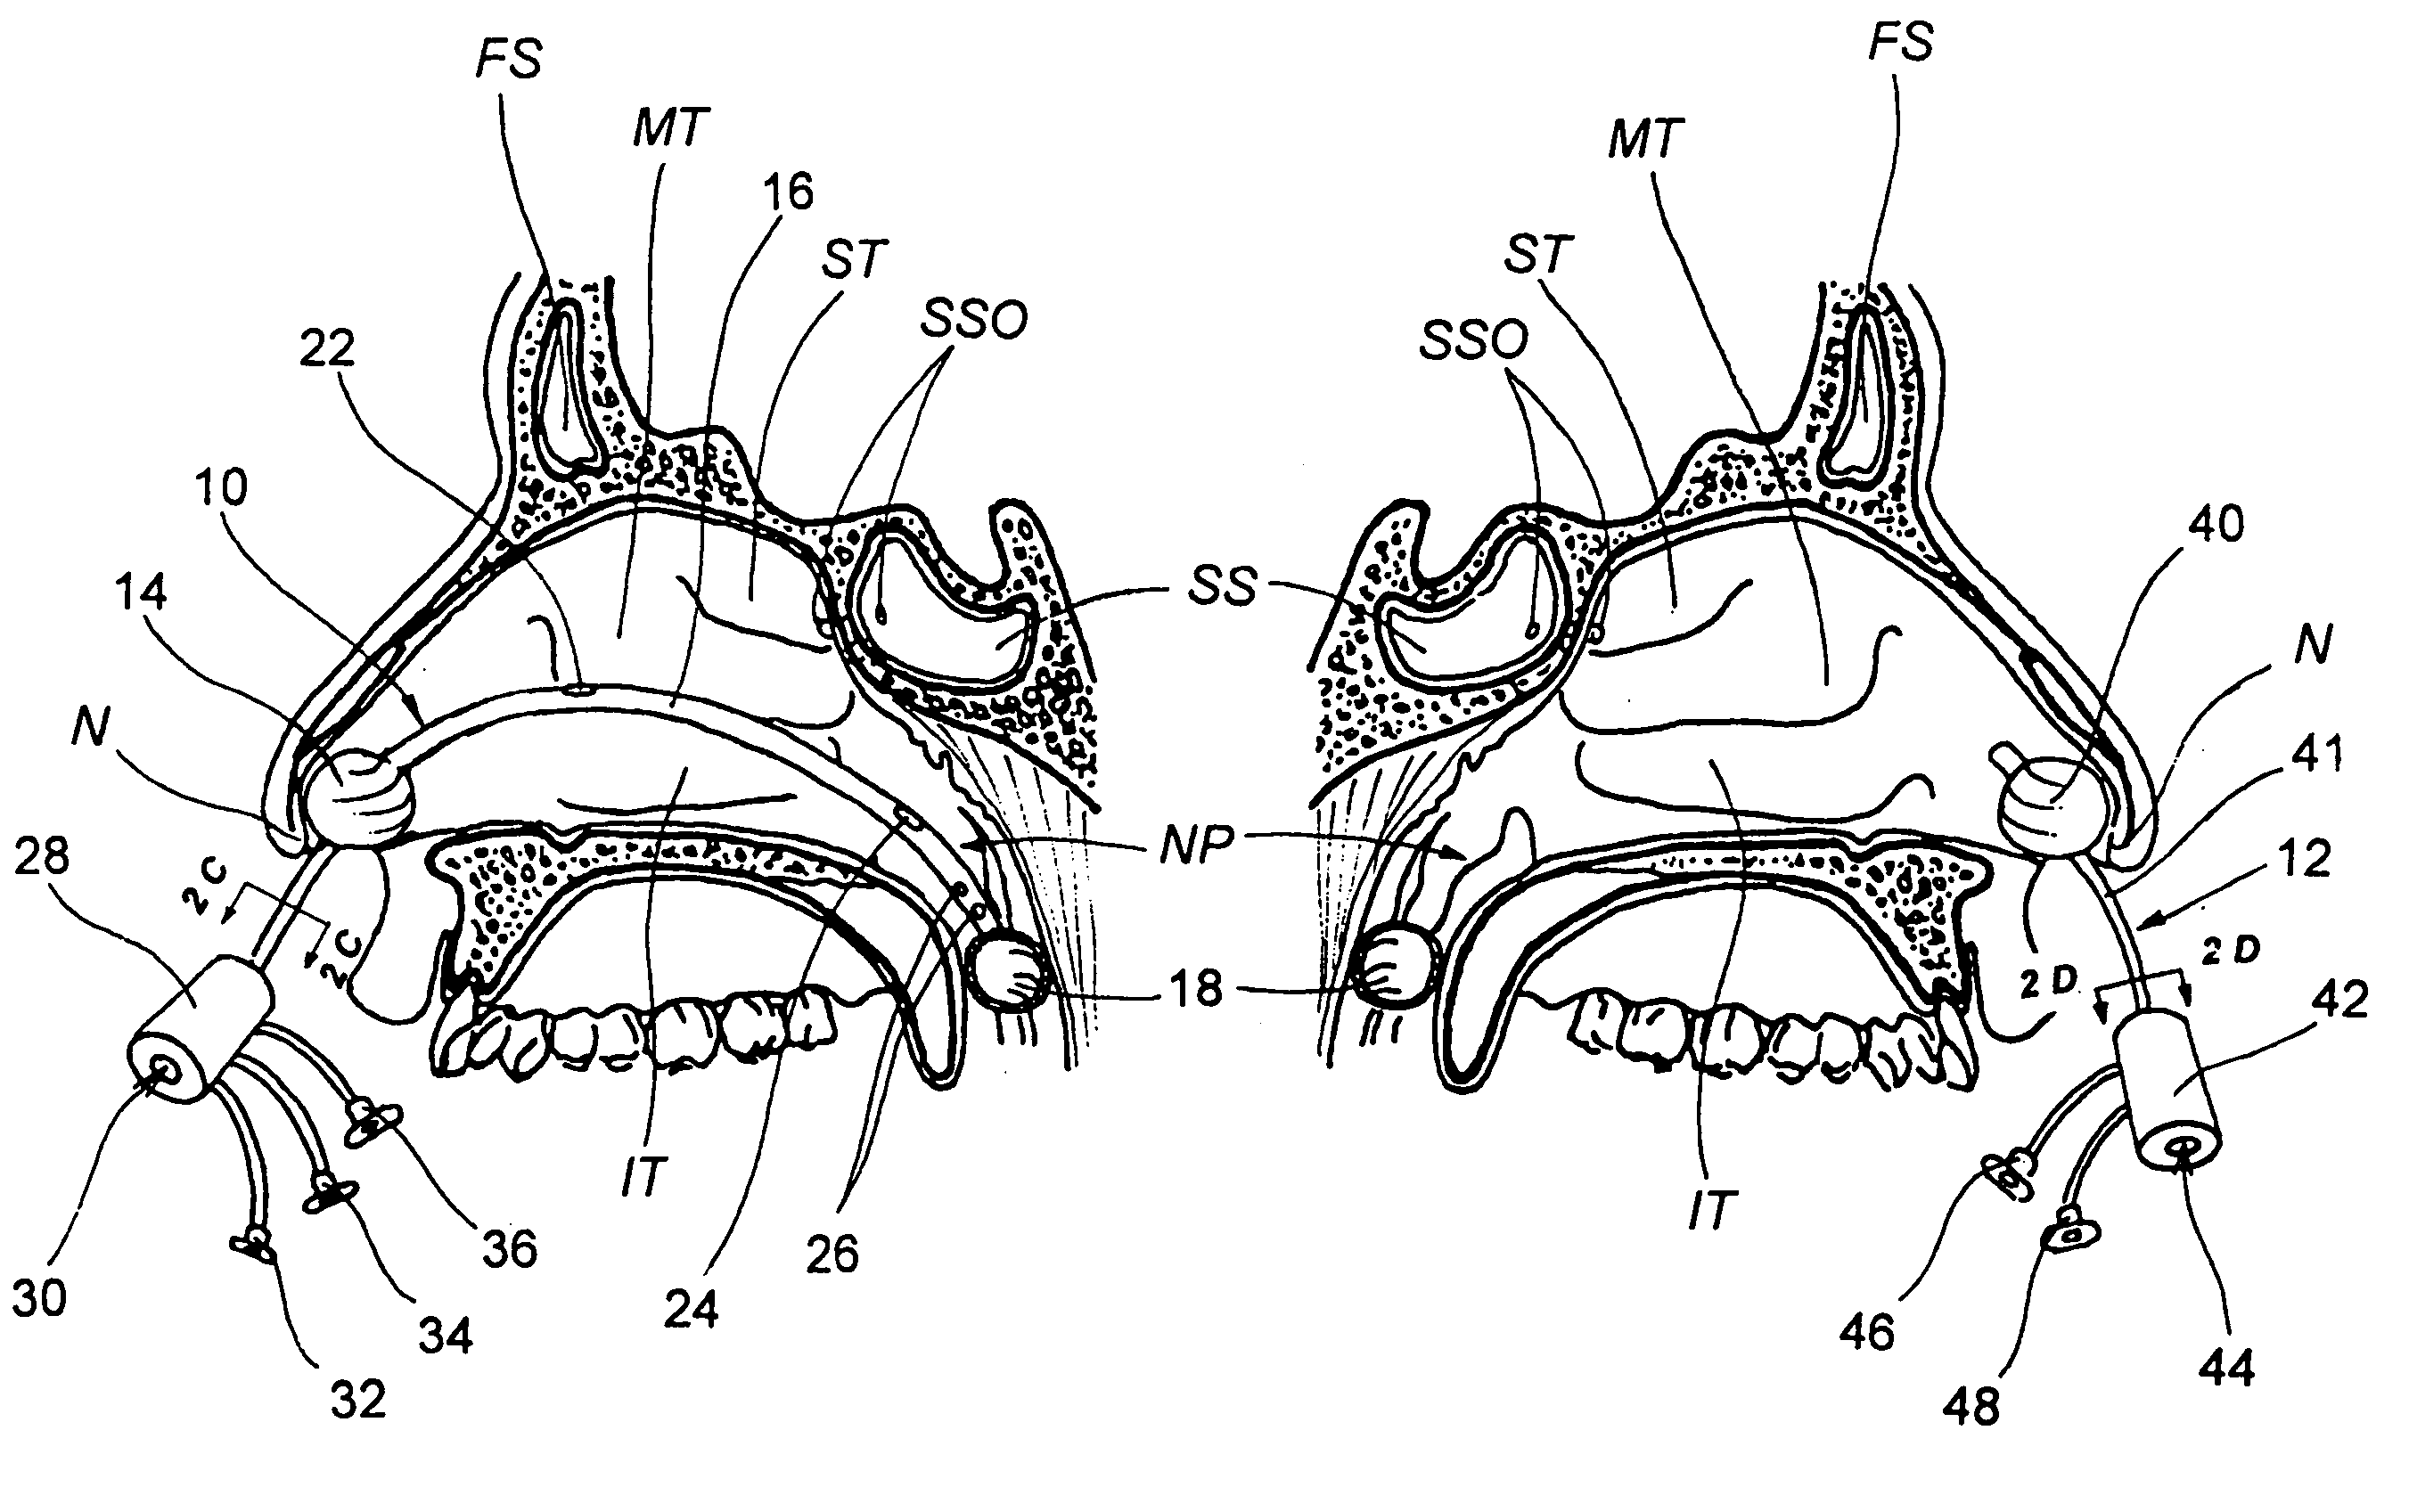 Devices, systems and methods for diagnosing and treating sinusitus and other disorders of the ears, nose and/or throat